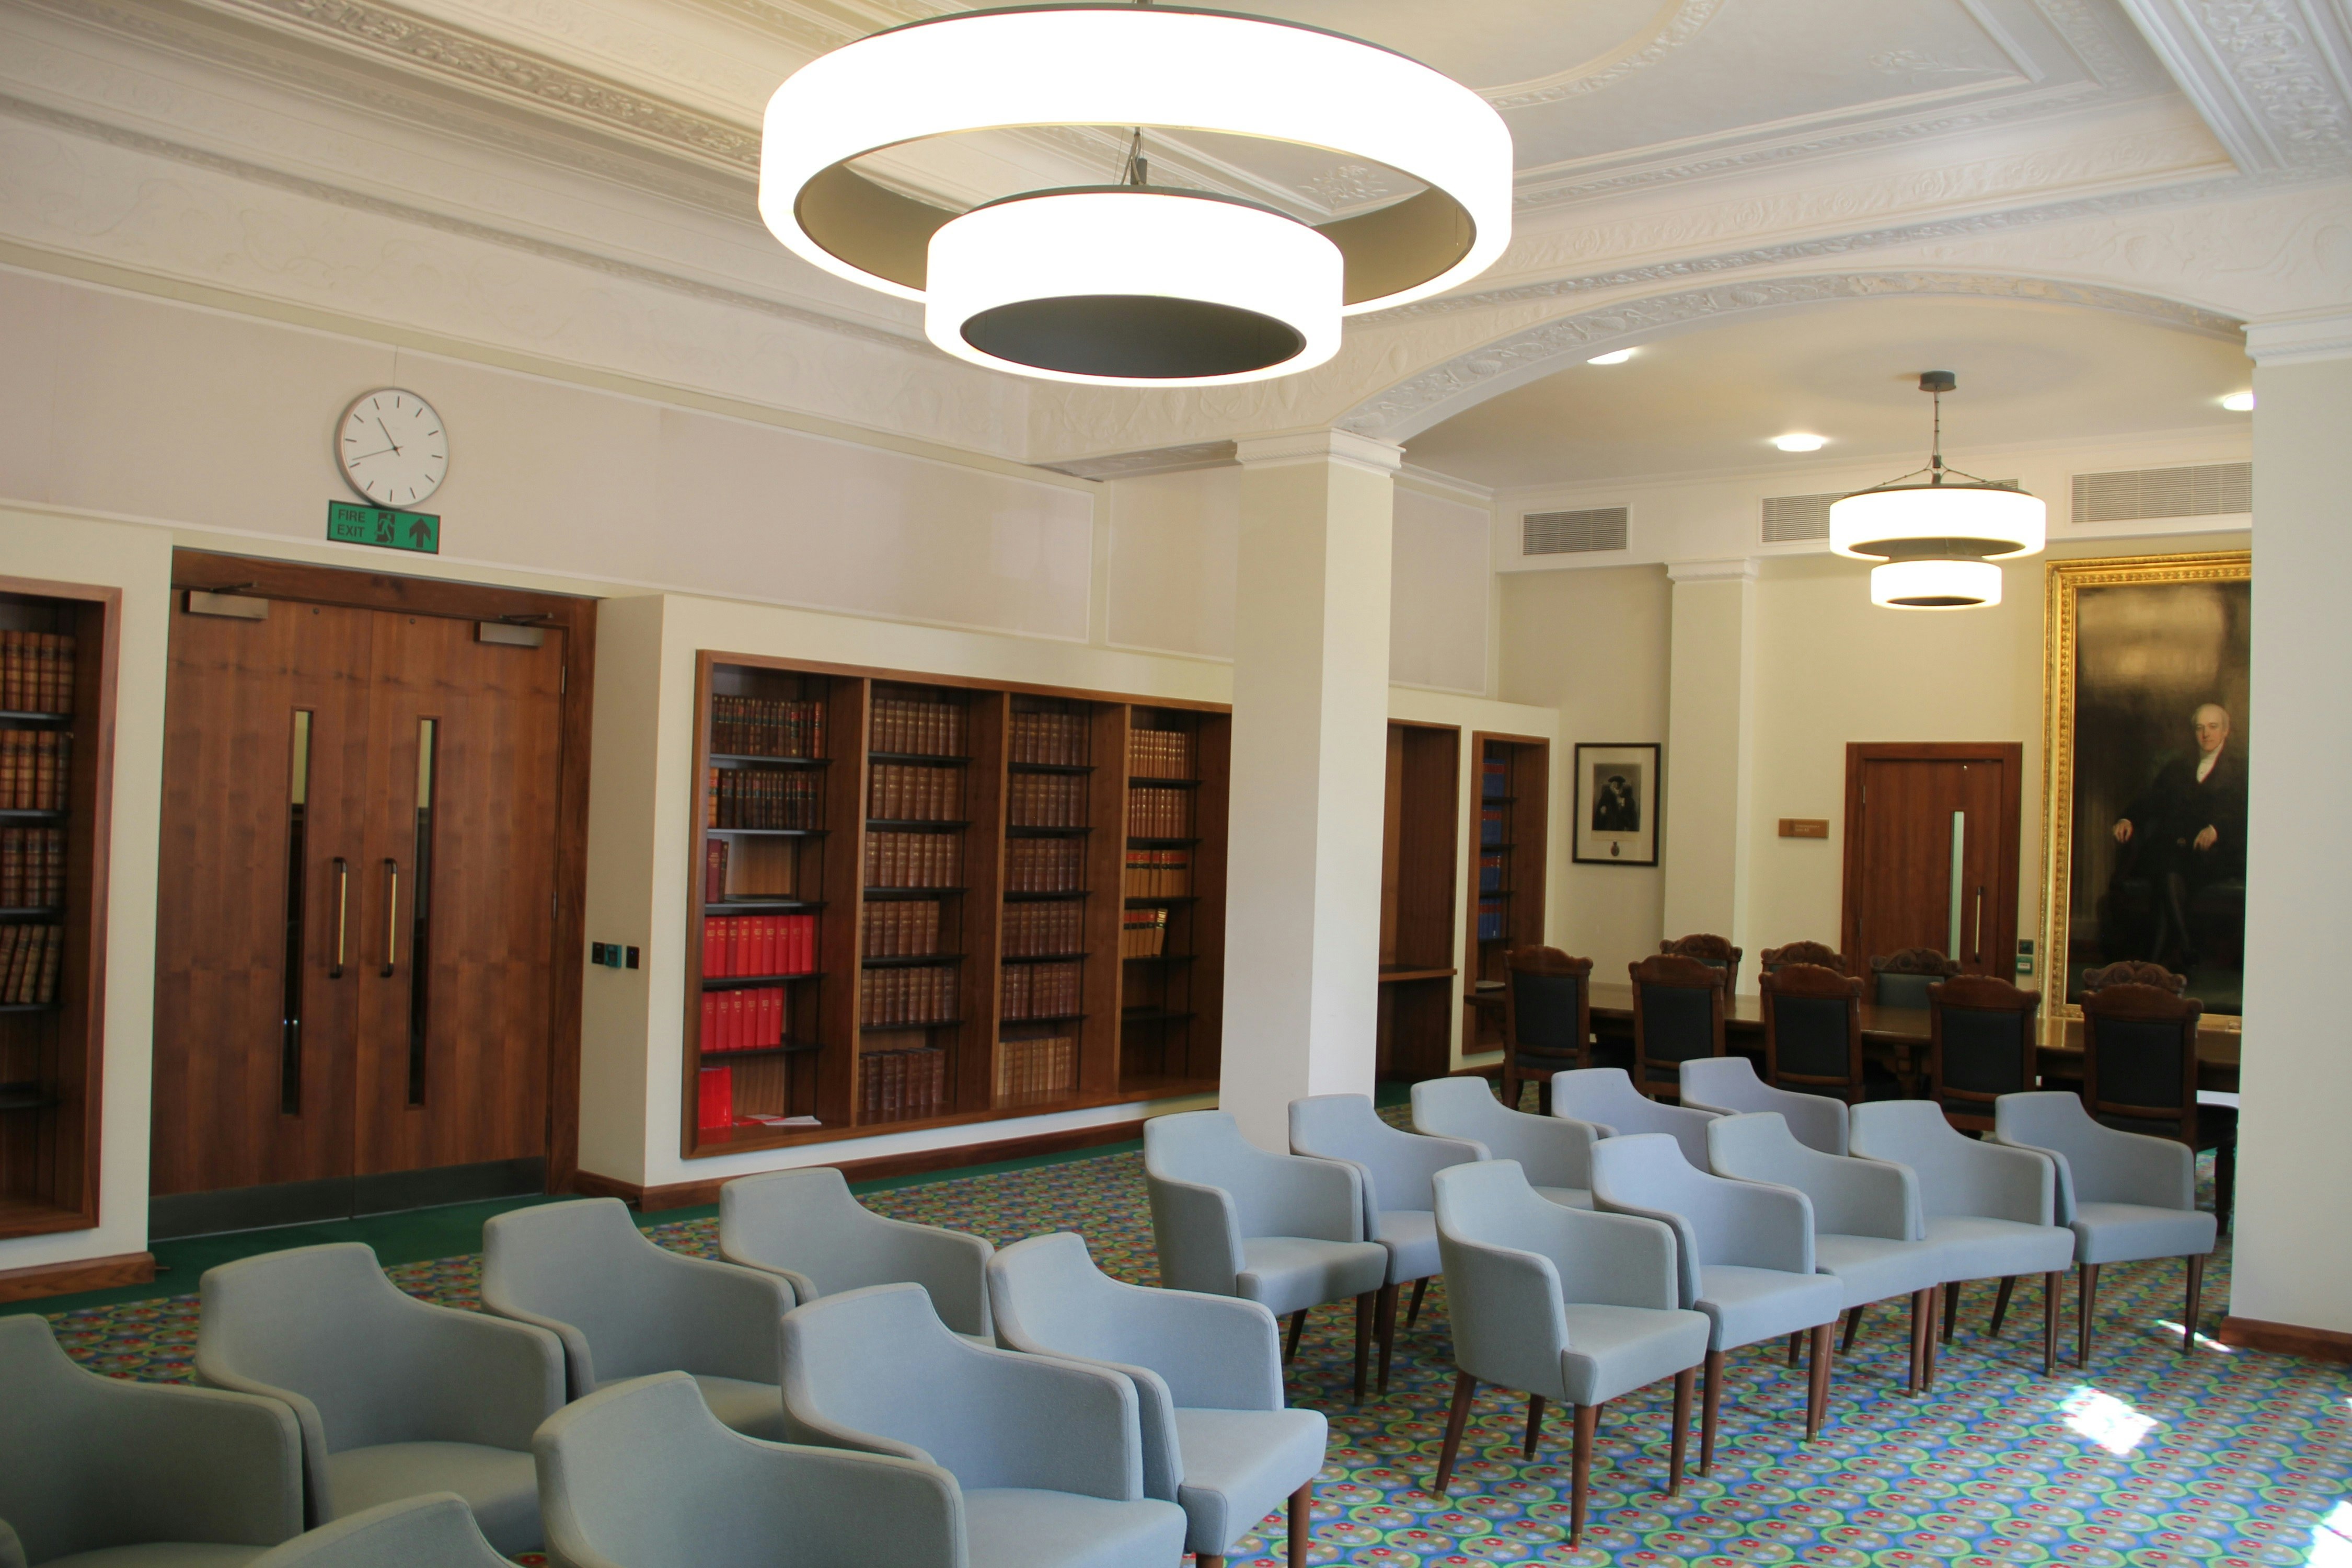 Corporate Days Out Venues in London - The Supreme Court of the United Kingdom